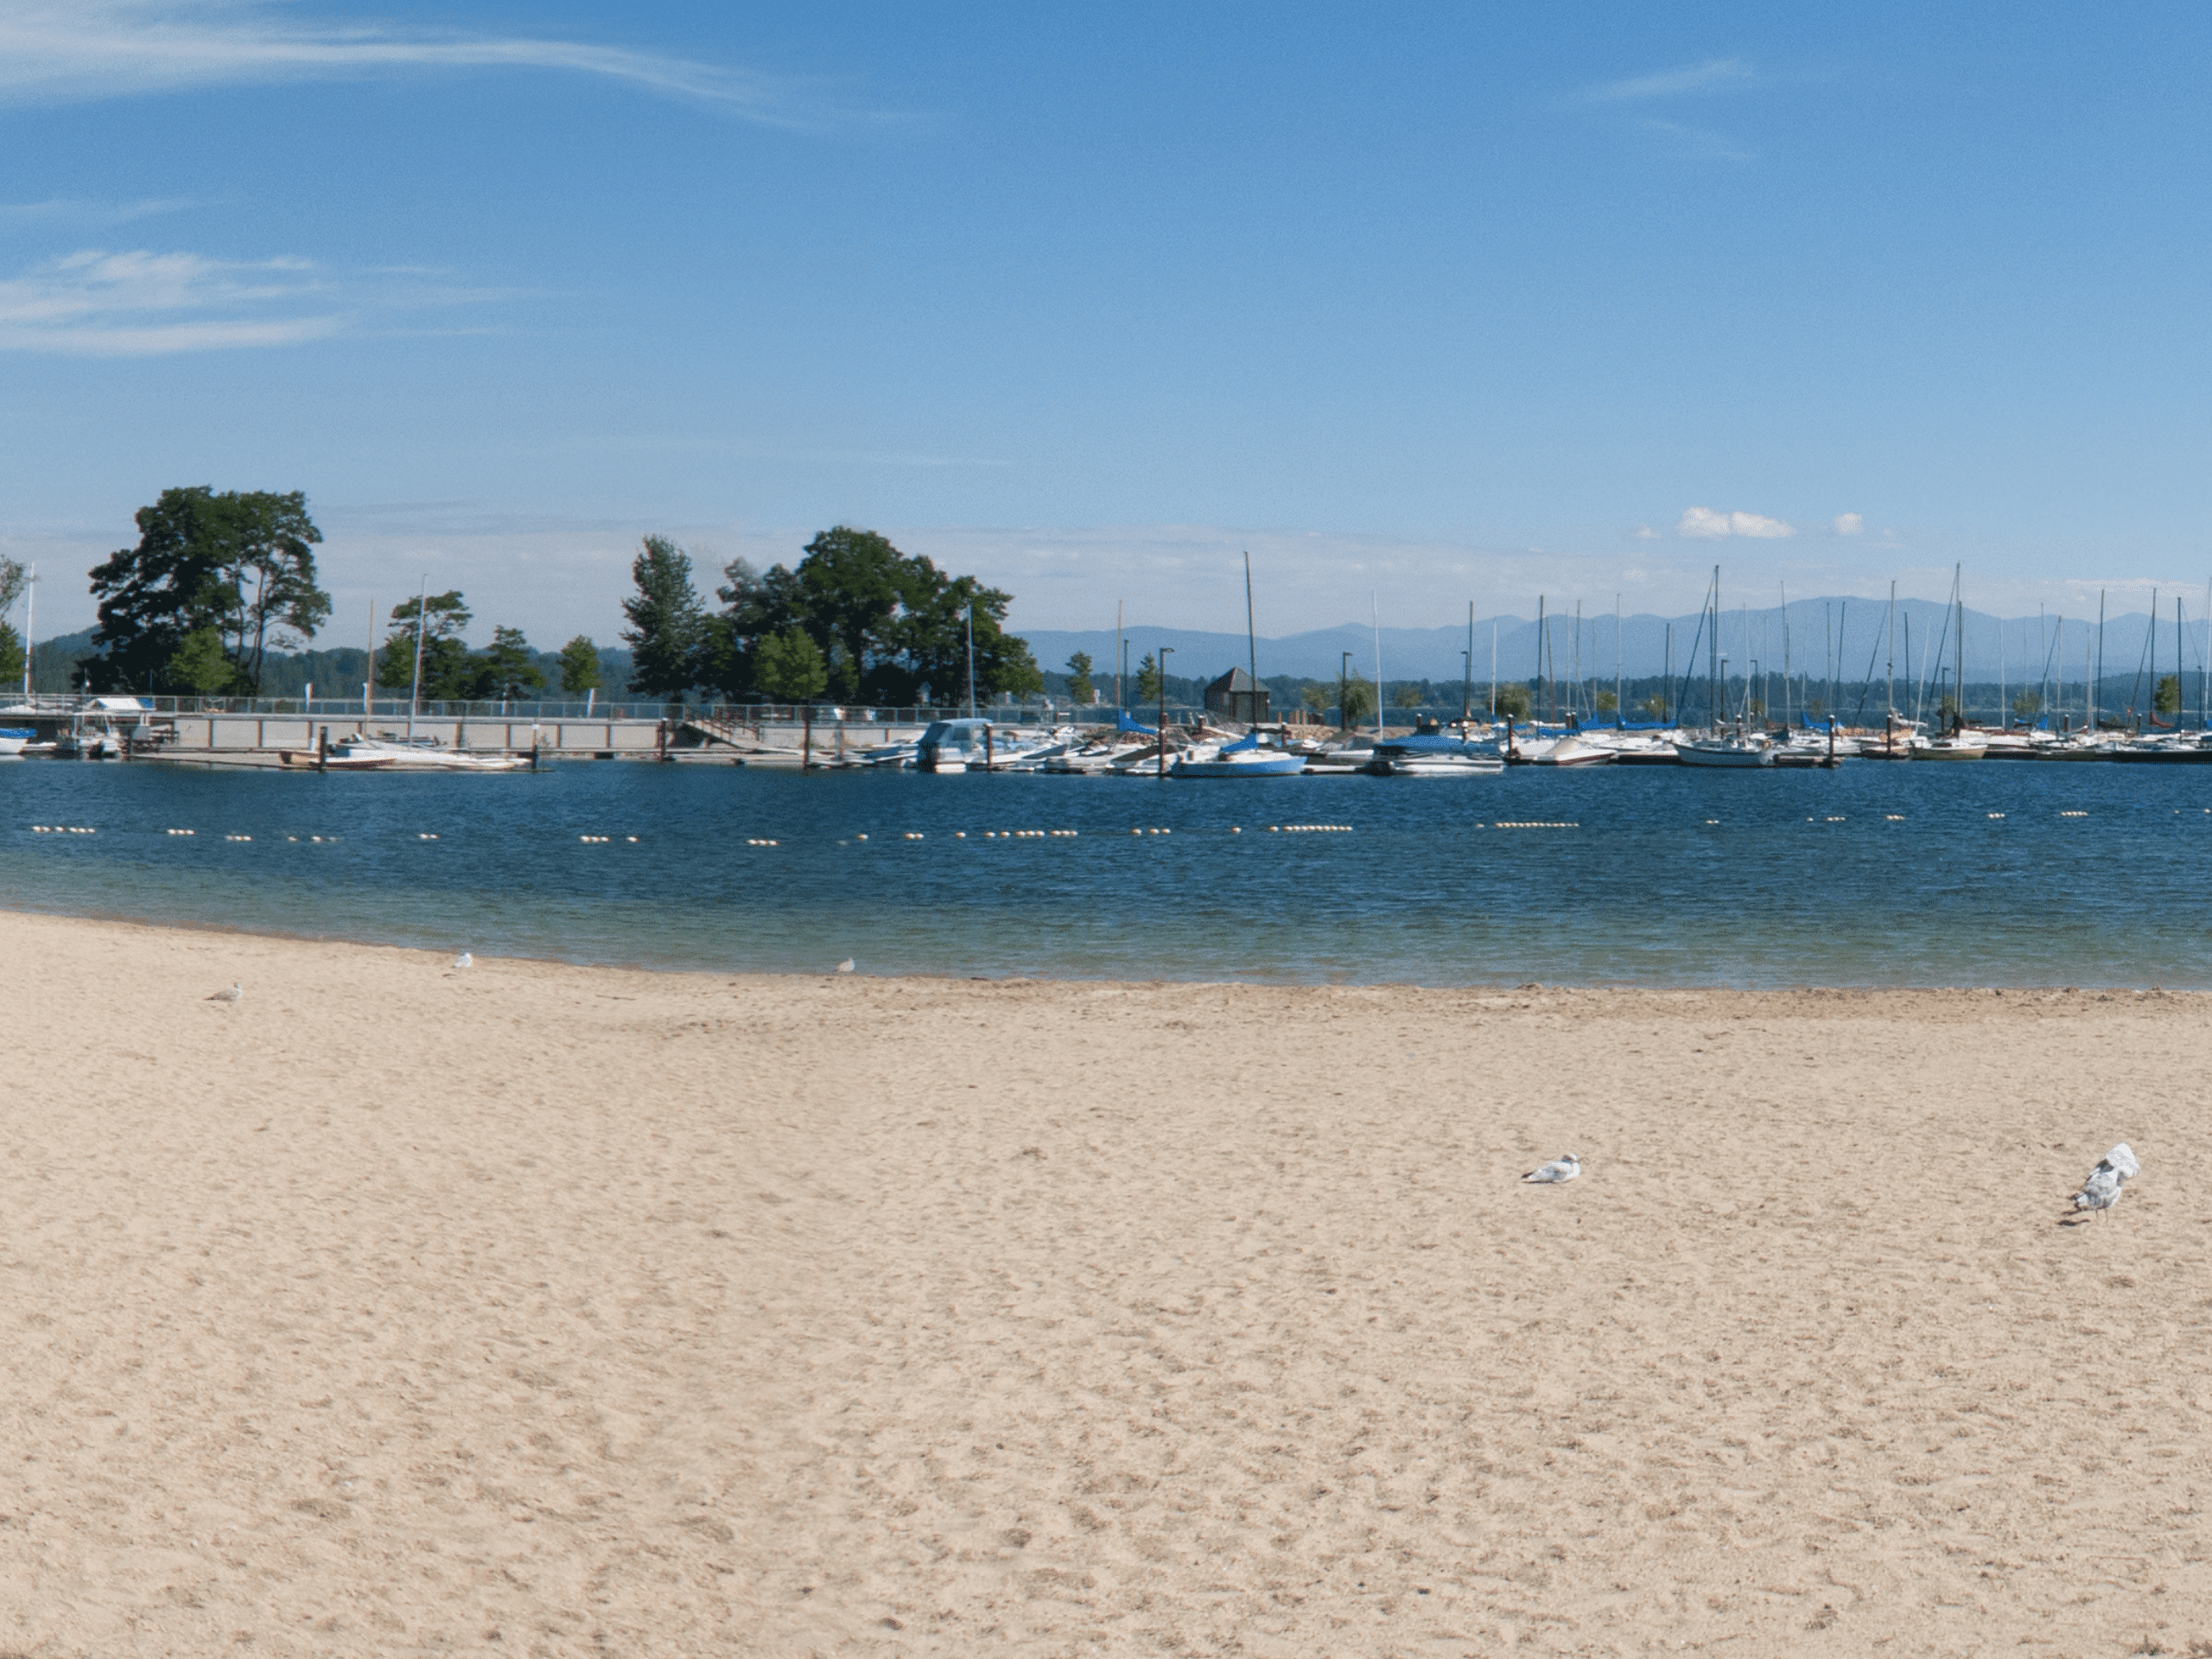 Boats parked at sandpoint beach